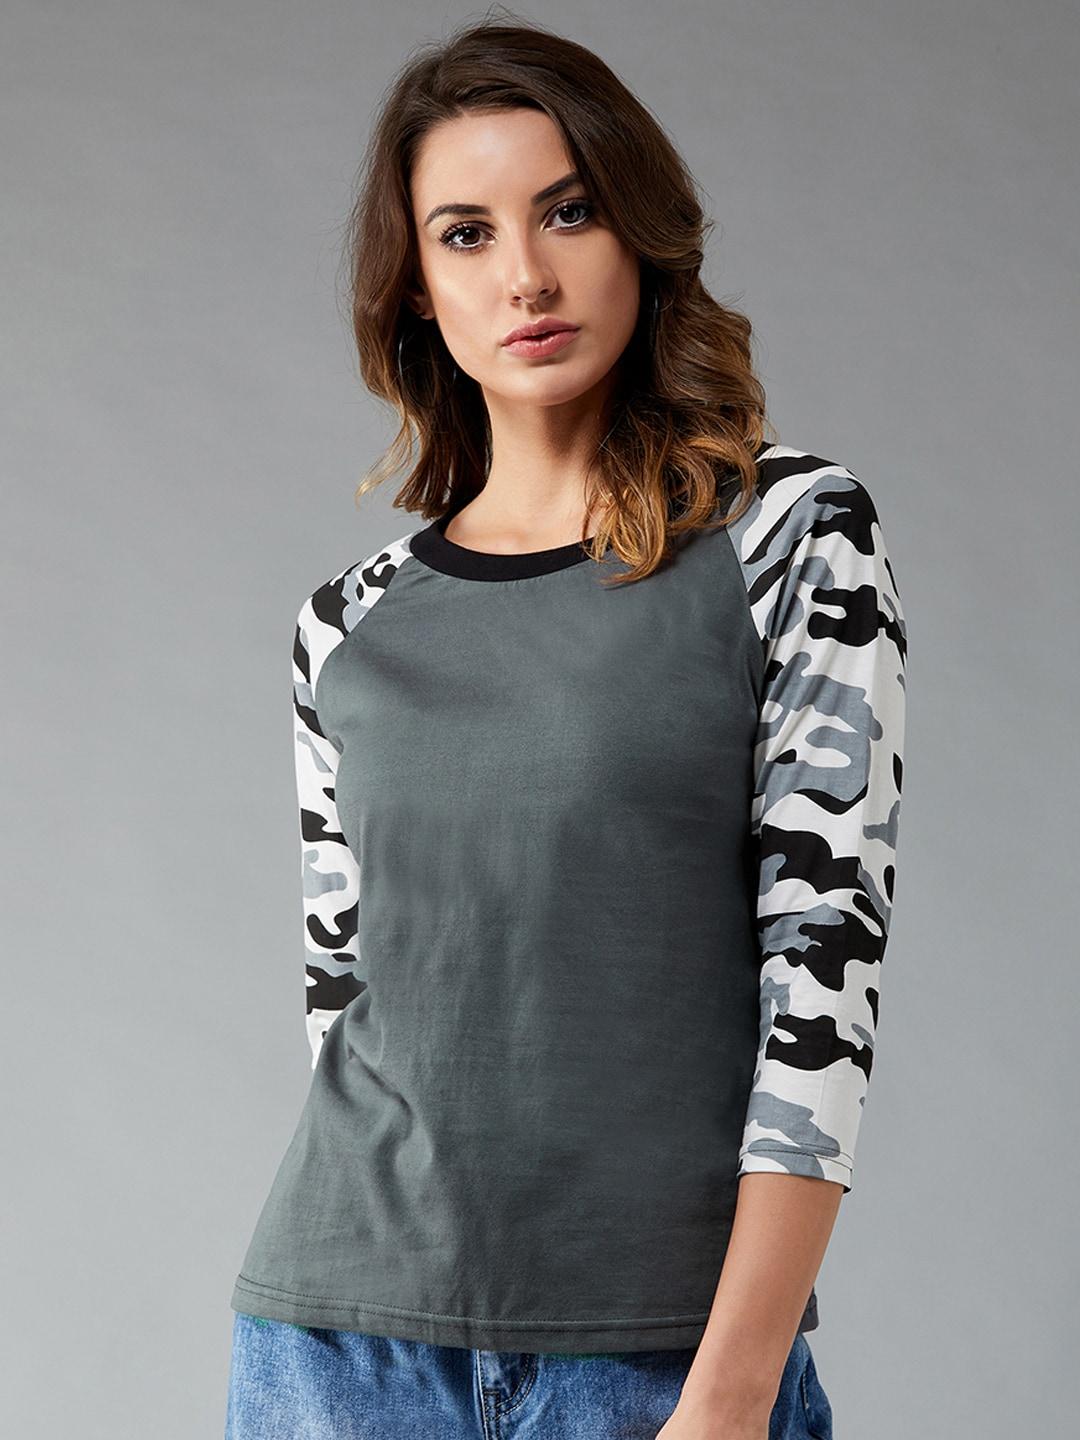 dolce-crudo-women-charcoal-grey-printed-round-neck-pure-cotton-t-shirt